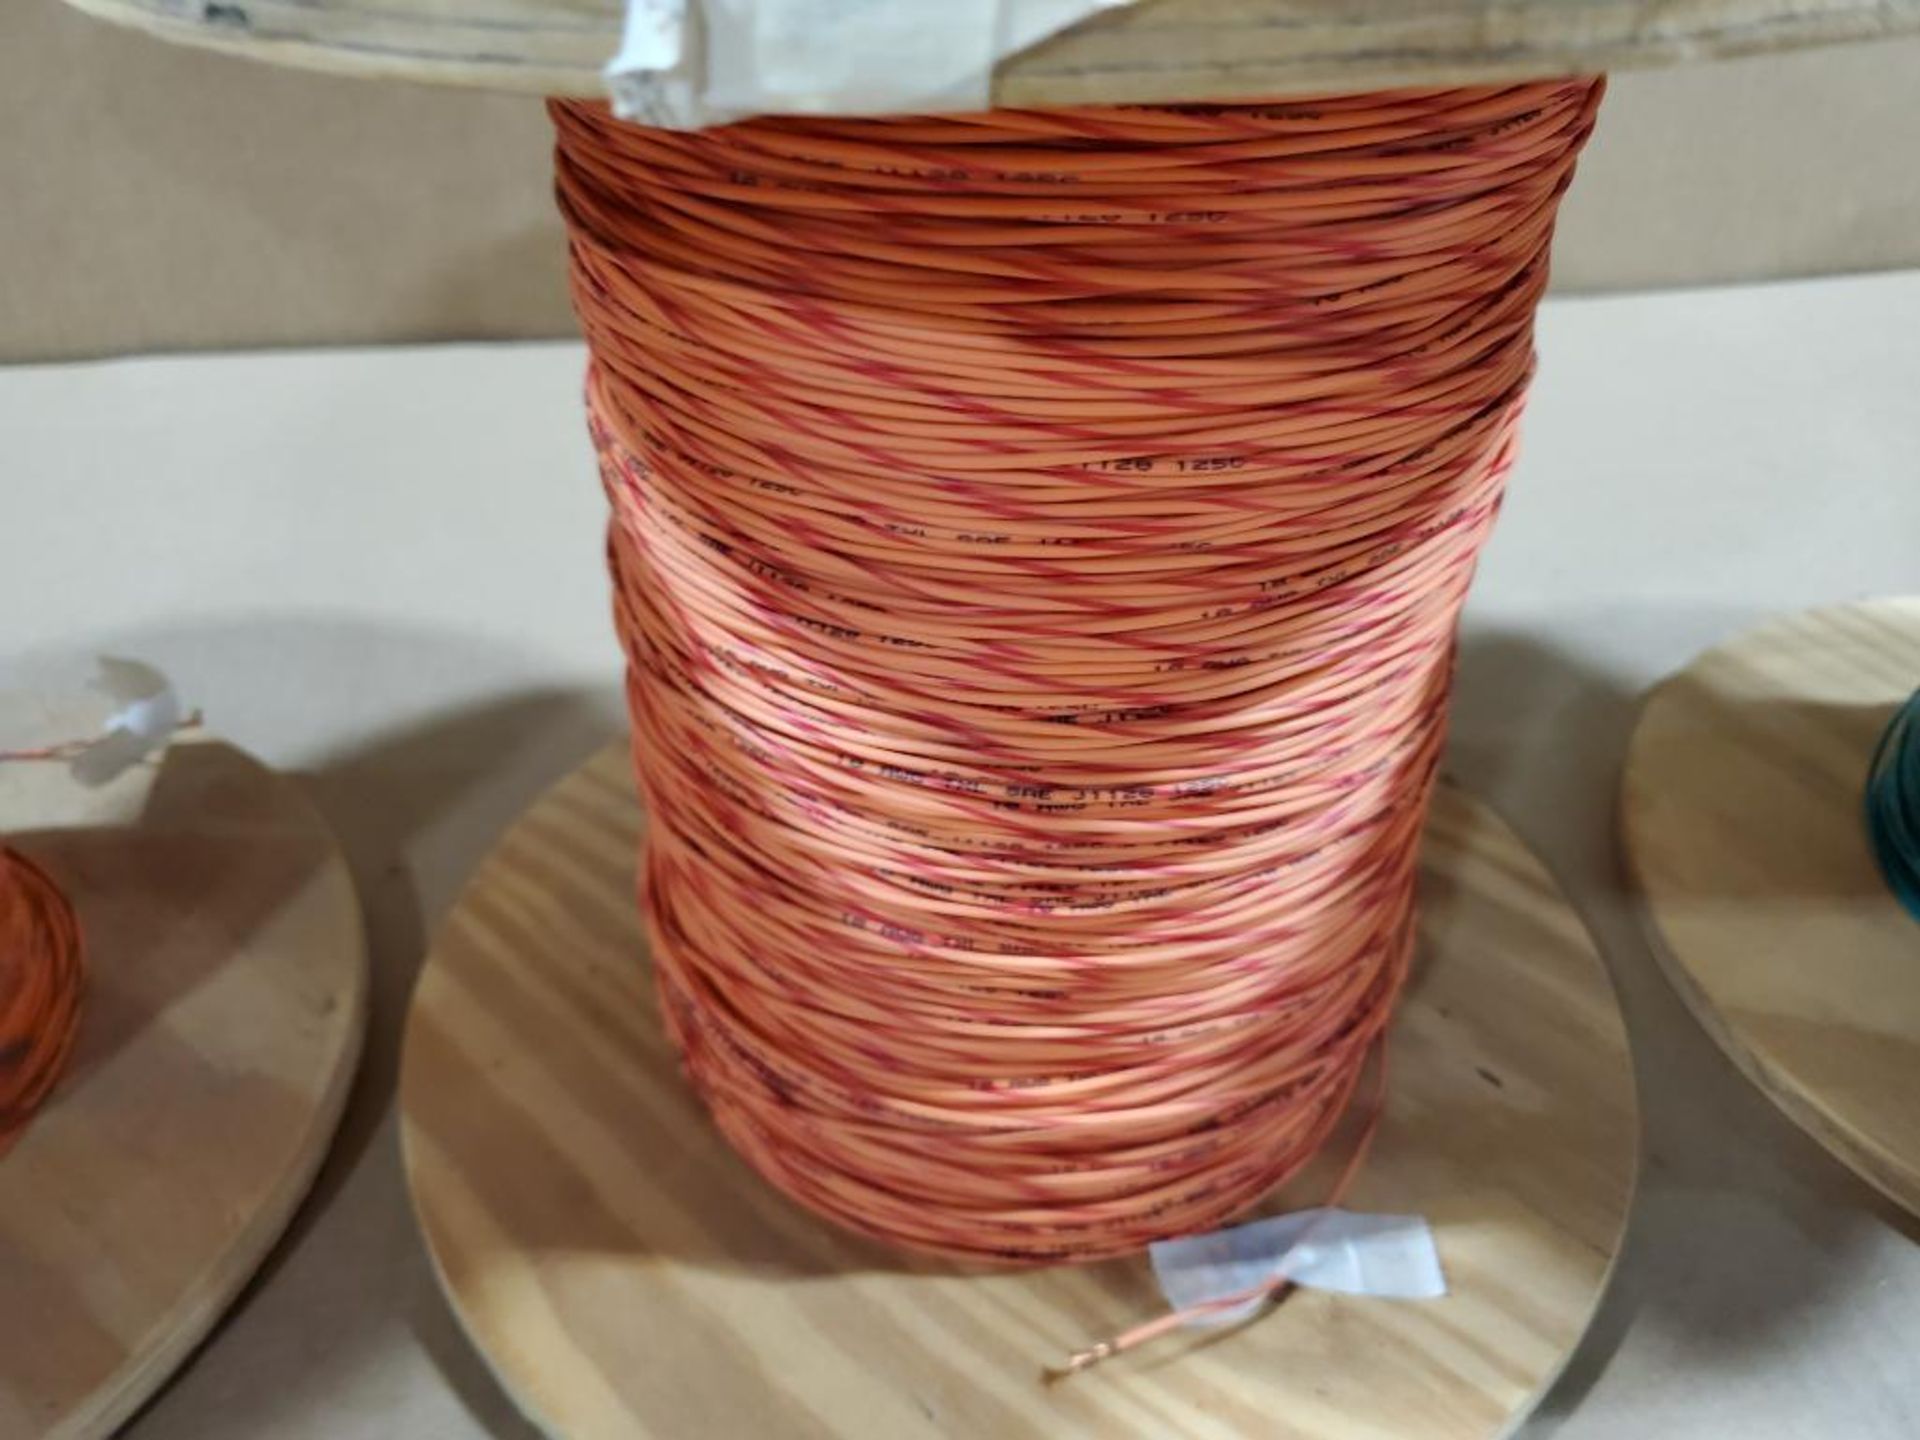 Qty 3 - Assorted awg assorted copper wire. 22lbs total gross combined weight for all rolls. - Image 4 of 7